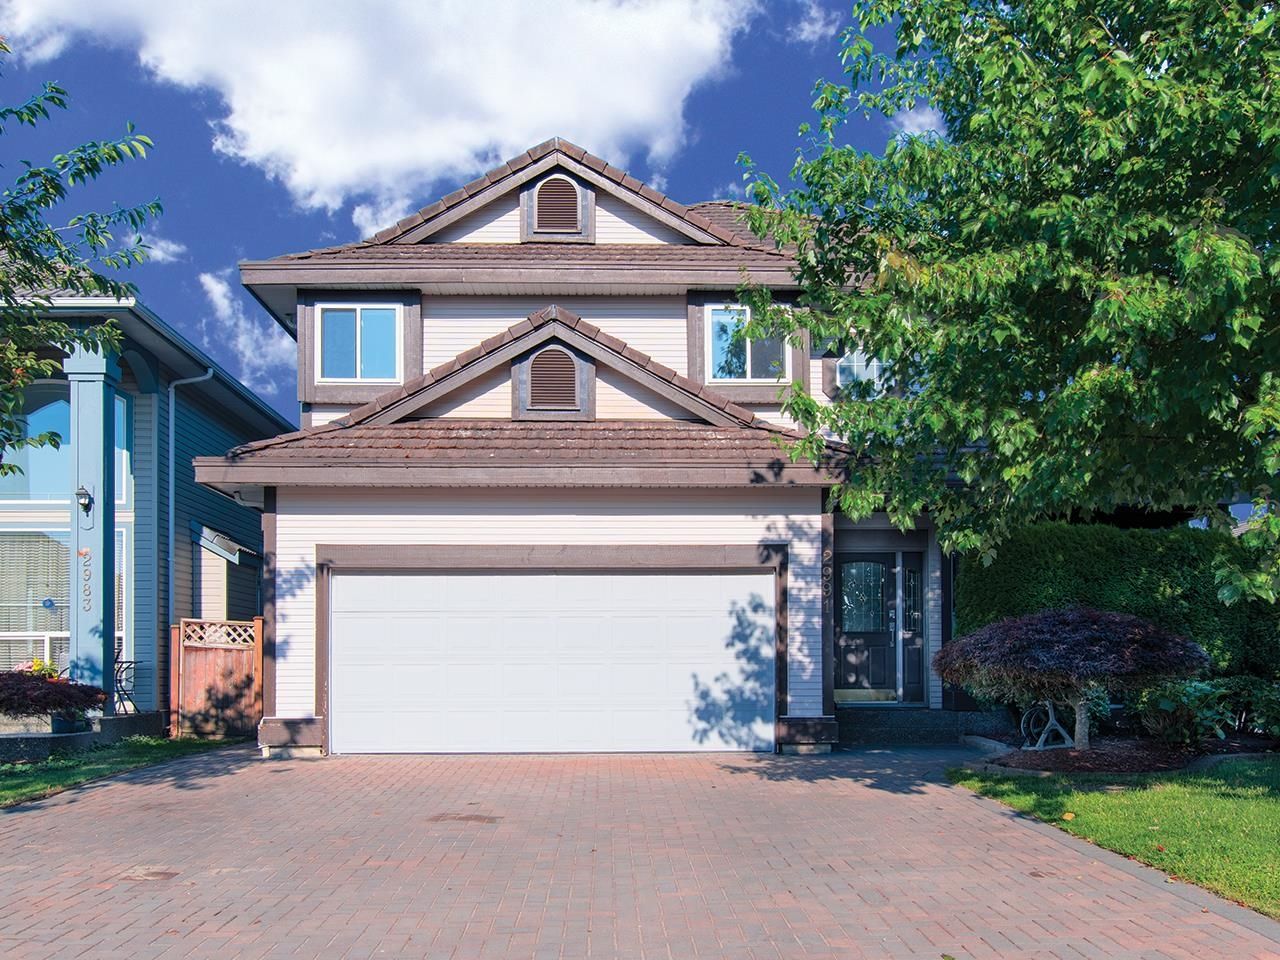 Open House. Open House on Sunday, August 7, 2022 2:00PM - 4:00PM
Welcome to YOUR Easy Lifestyle Home! 4 Bedrooms + den in this beautiful 2-storey, 2,480 sf house with a low-maintenance exterior, private yard guarded by trees! TOO MUCH TO FIT HERE! Start w